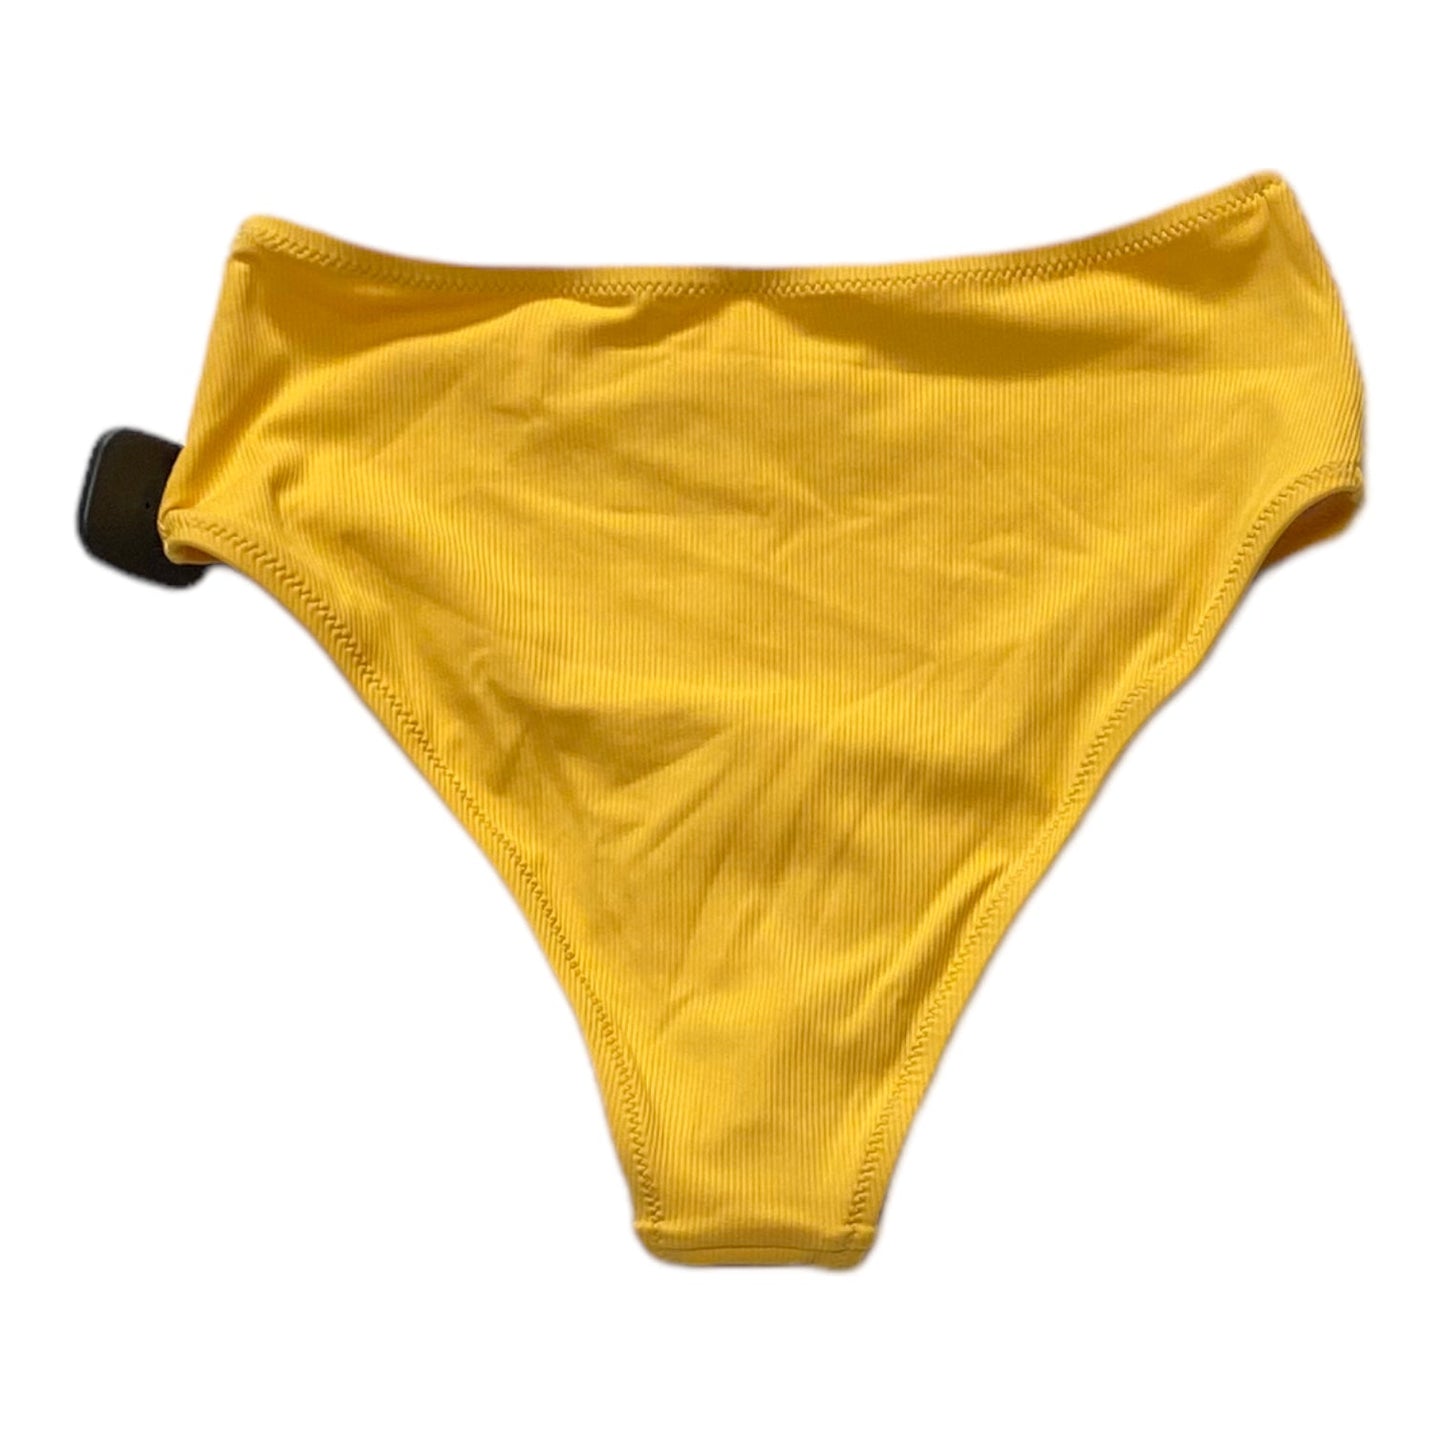 Yellow Swimsuit Bottom Cupshe, Size S